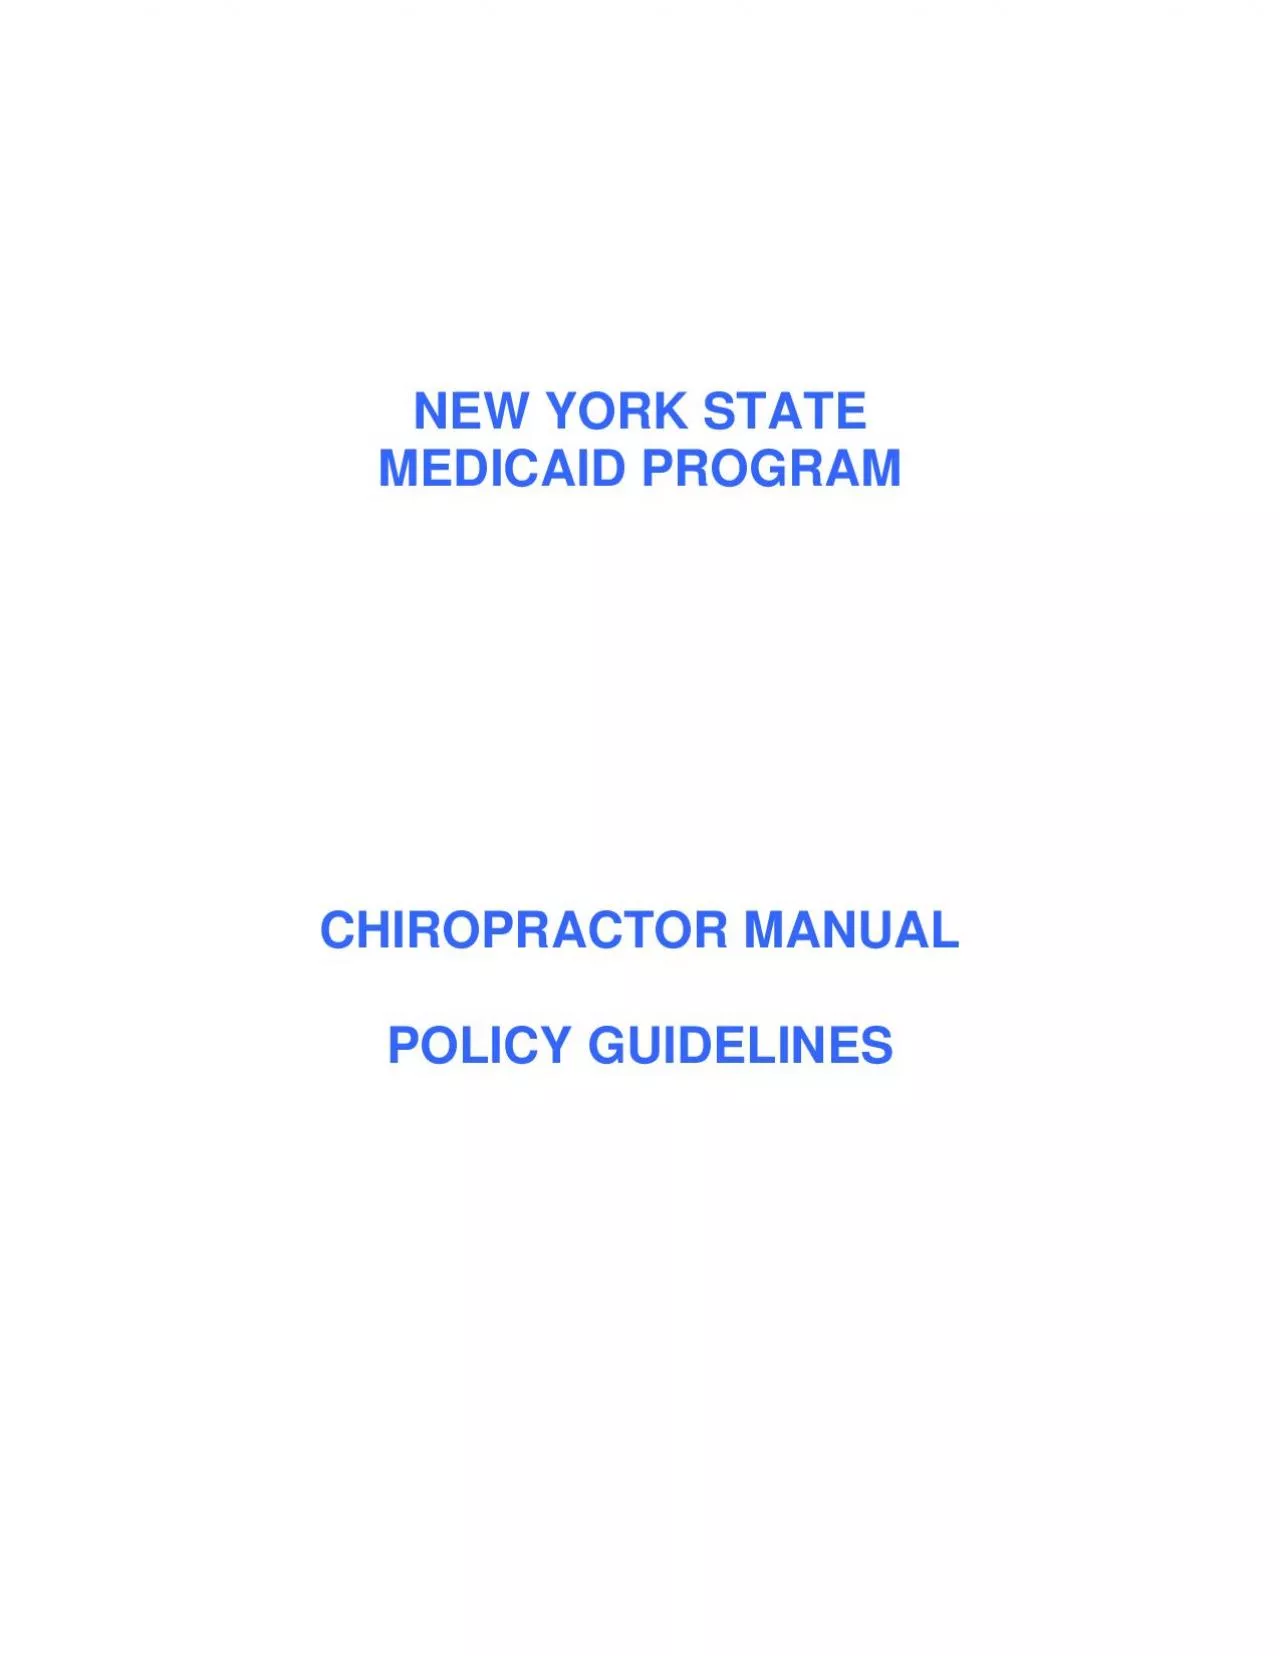 NEW YORK STATE MEDICAID PROGRAM  CHIROPRACTOR MANUAL  POLICY GUIDELINE